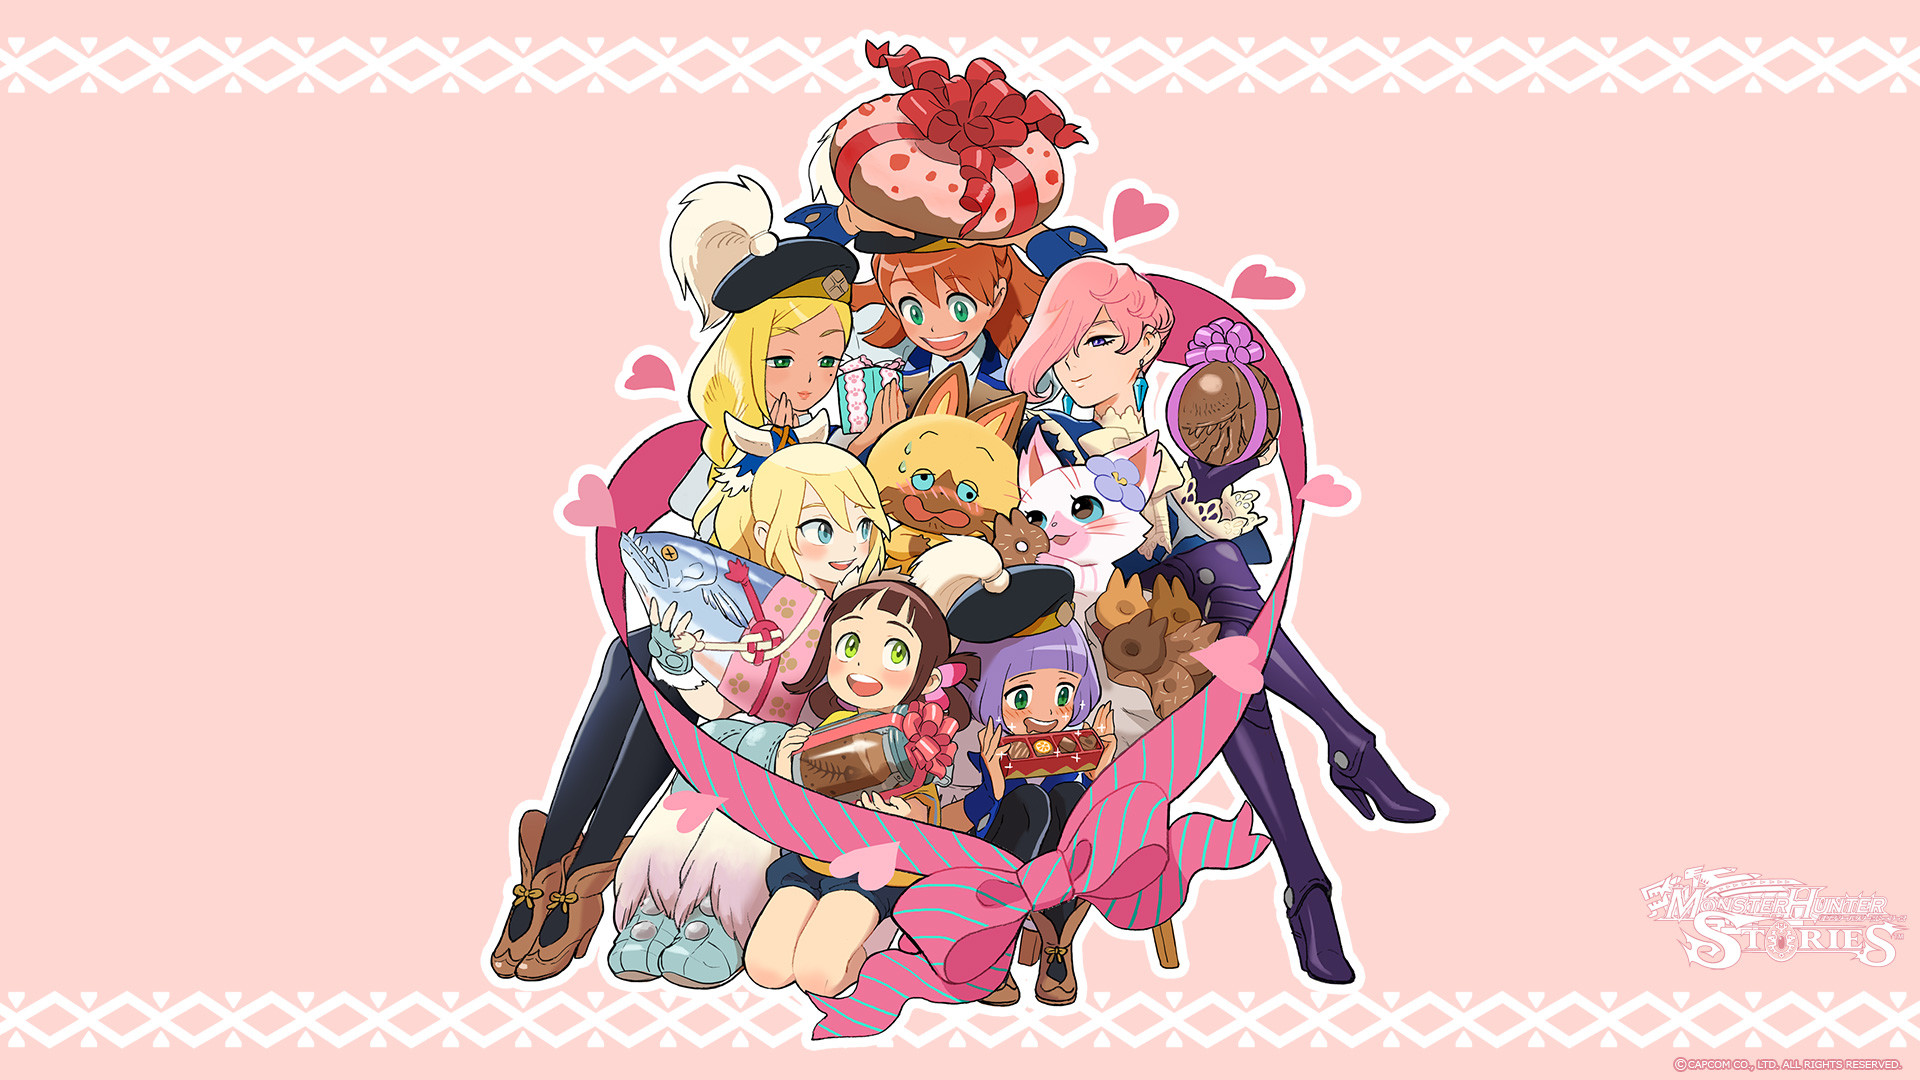 1920x1080 Monster Hunter Stories - special Valentine's Day wallpaper available